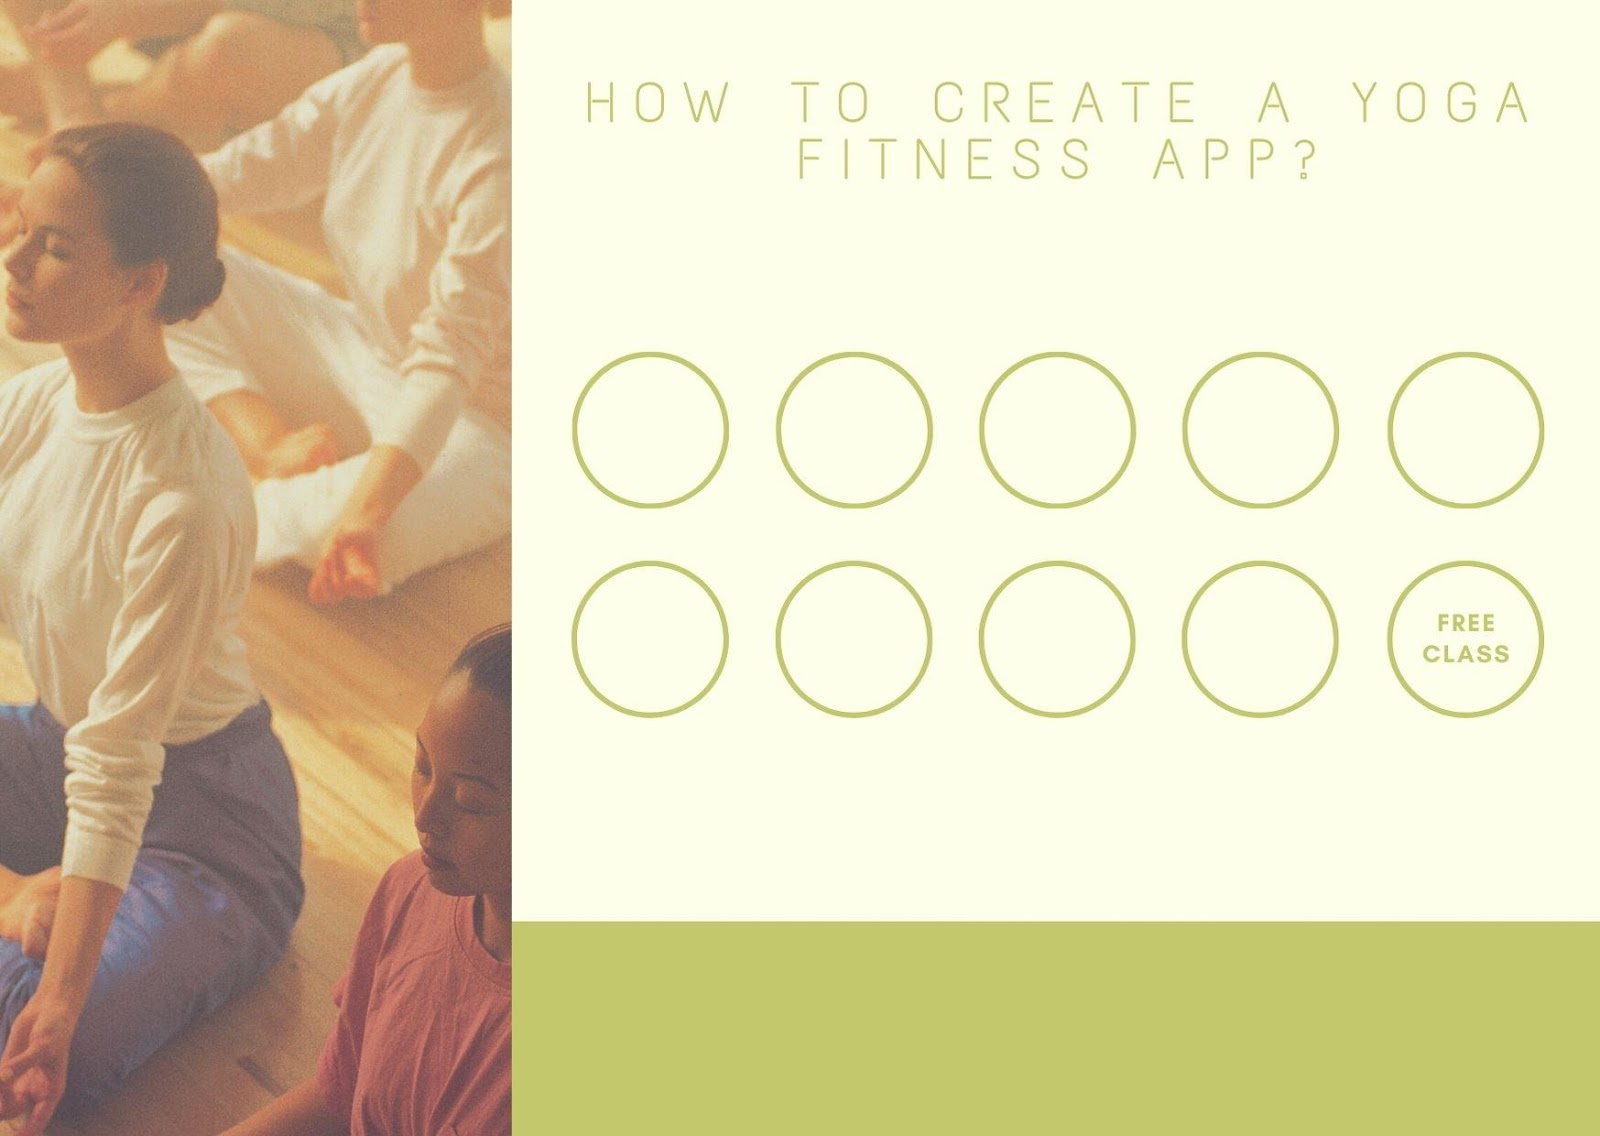 How to Create a Yoga Fitness App?